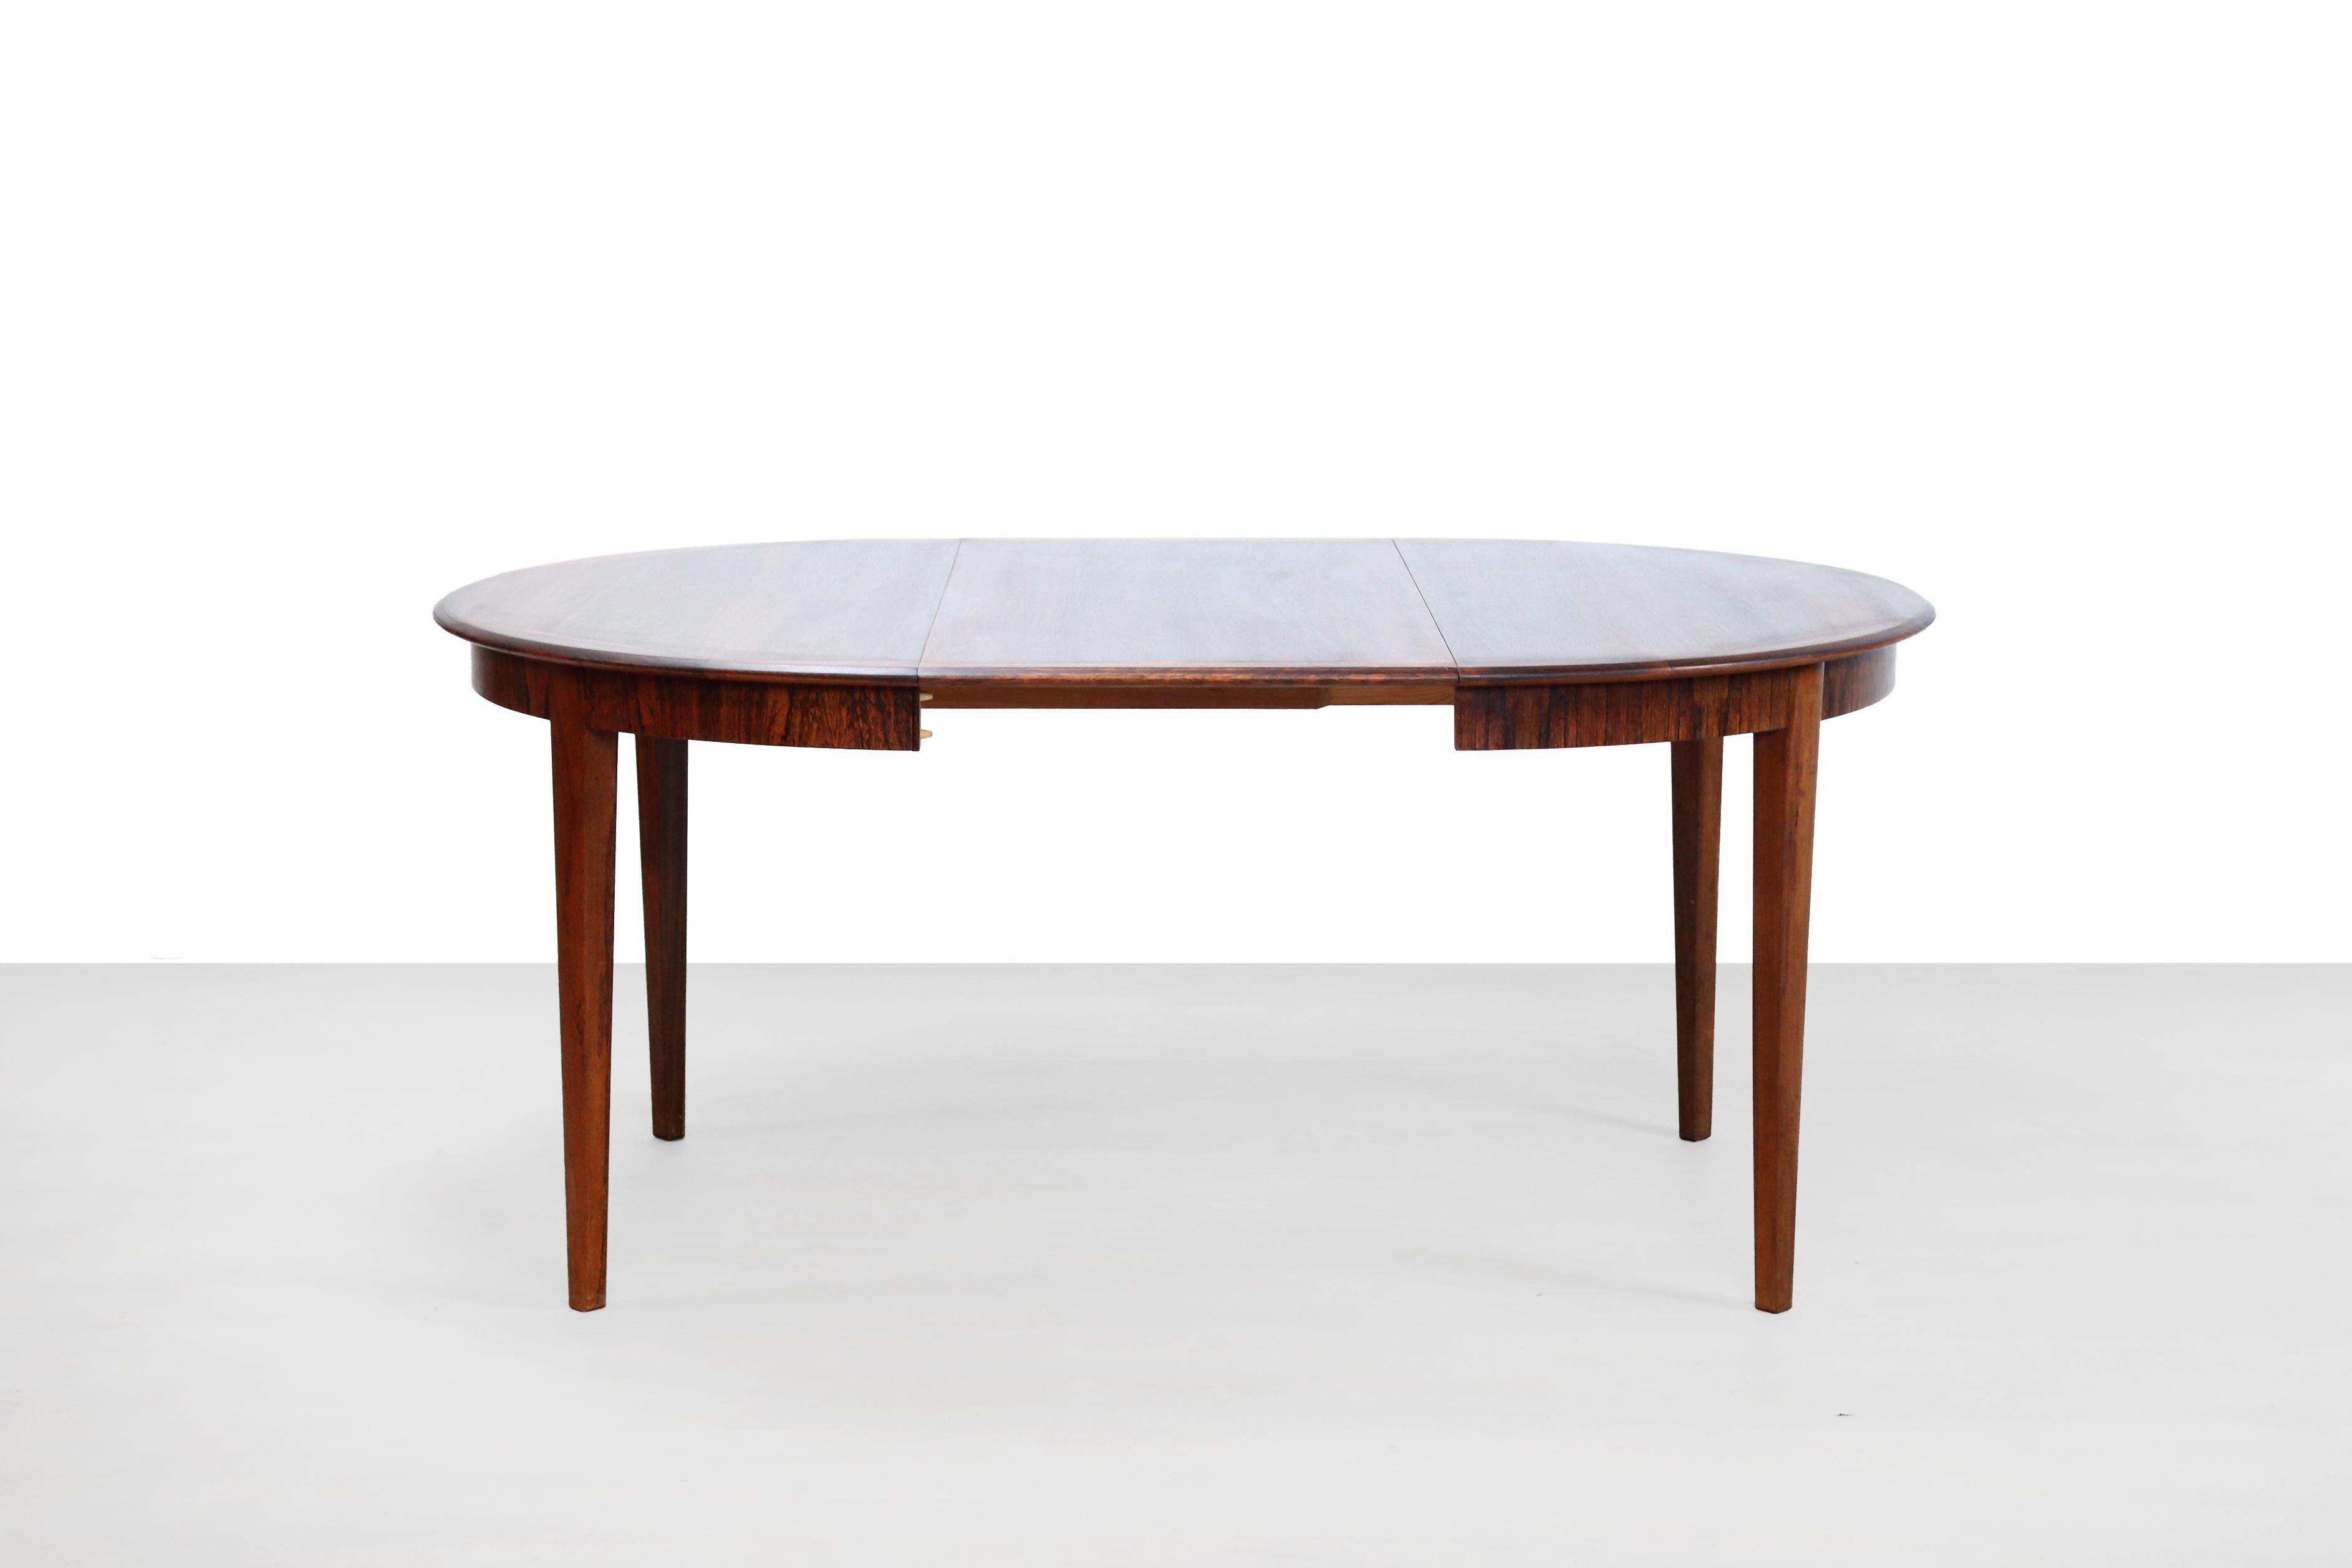 20th Century Johannes Nørgaard Rosewood Dining Set with 4 Chairs and Round Extending Table